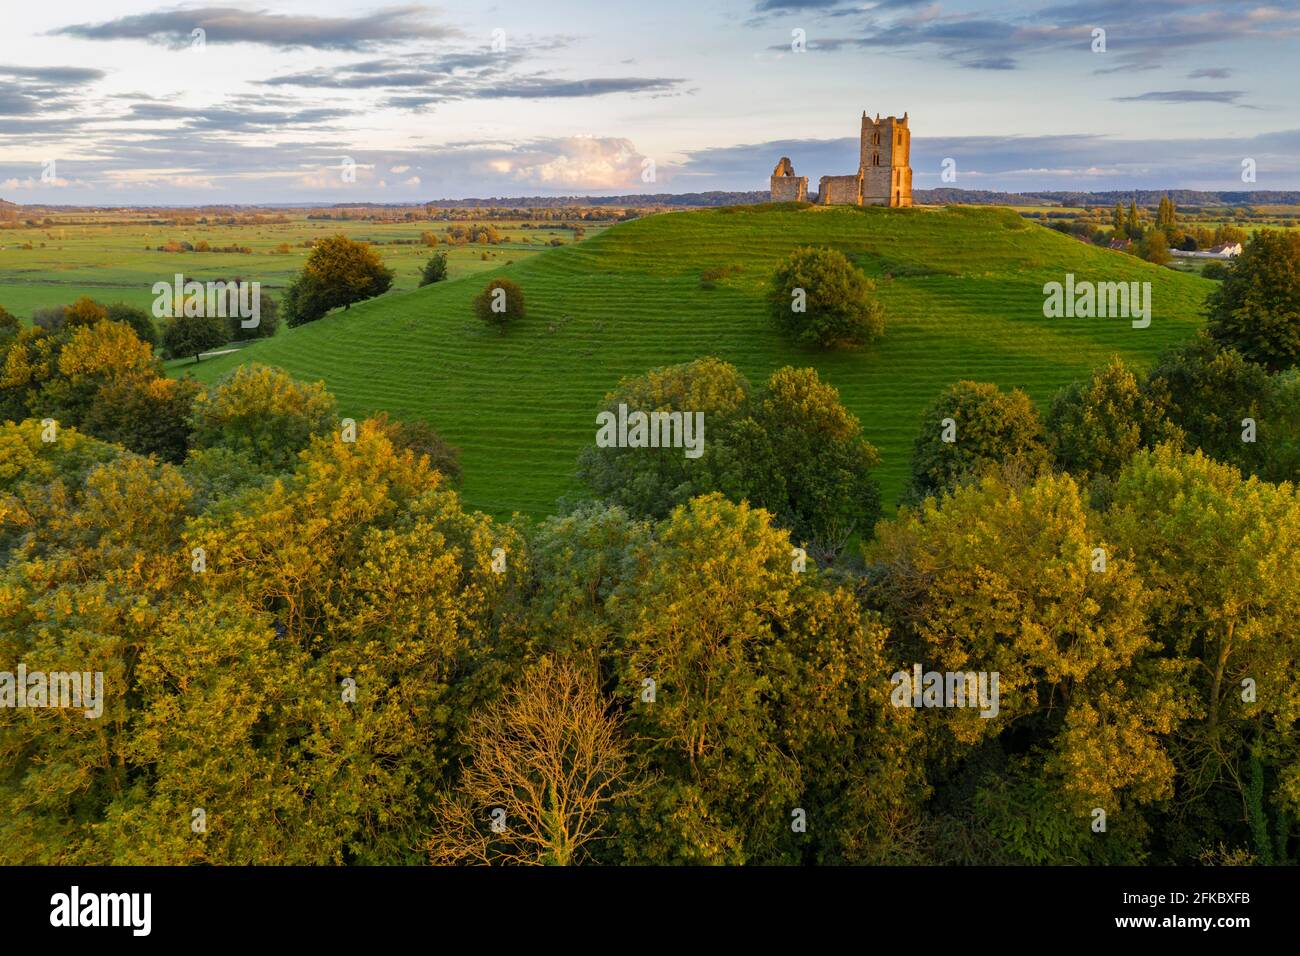 The ruins of St. Michael's Church on Burrow Mump in Somerset, England, United Kingdom, Europe Stock Photo